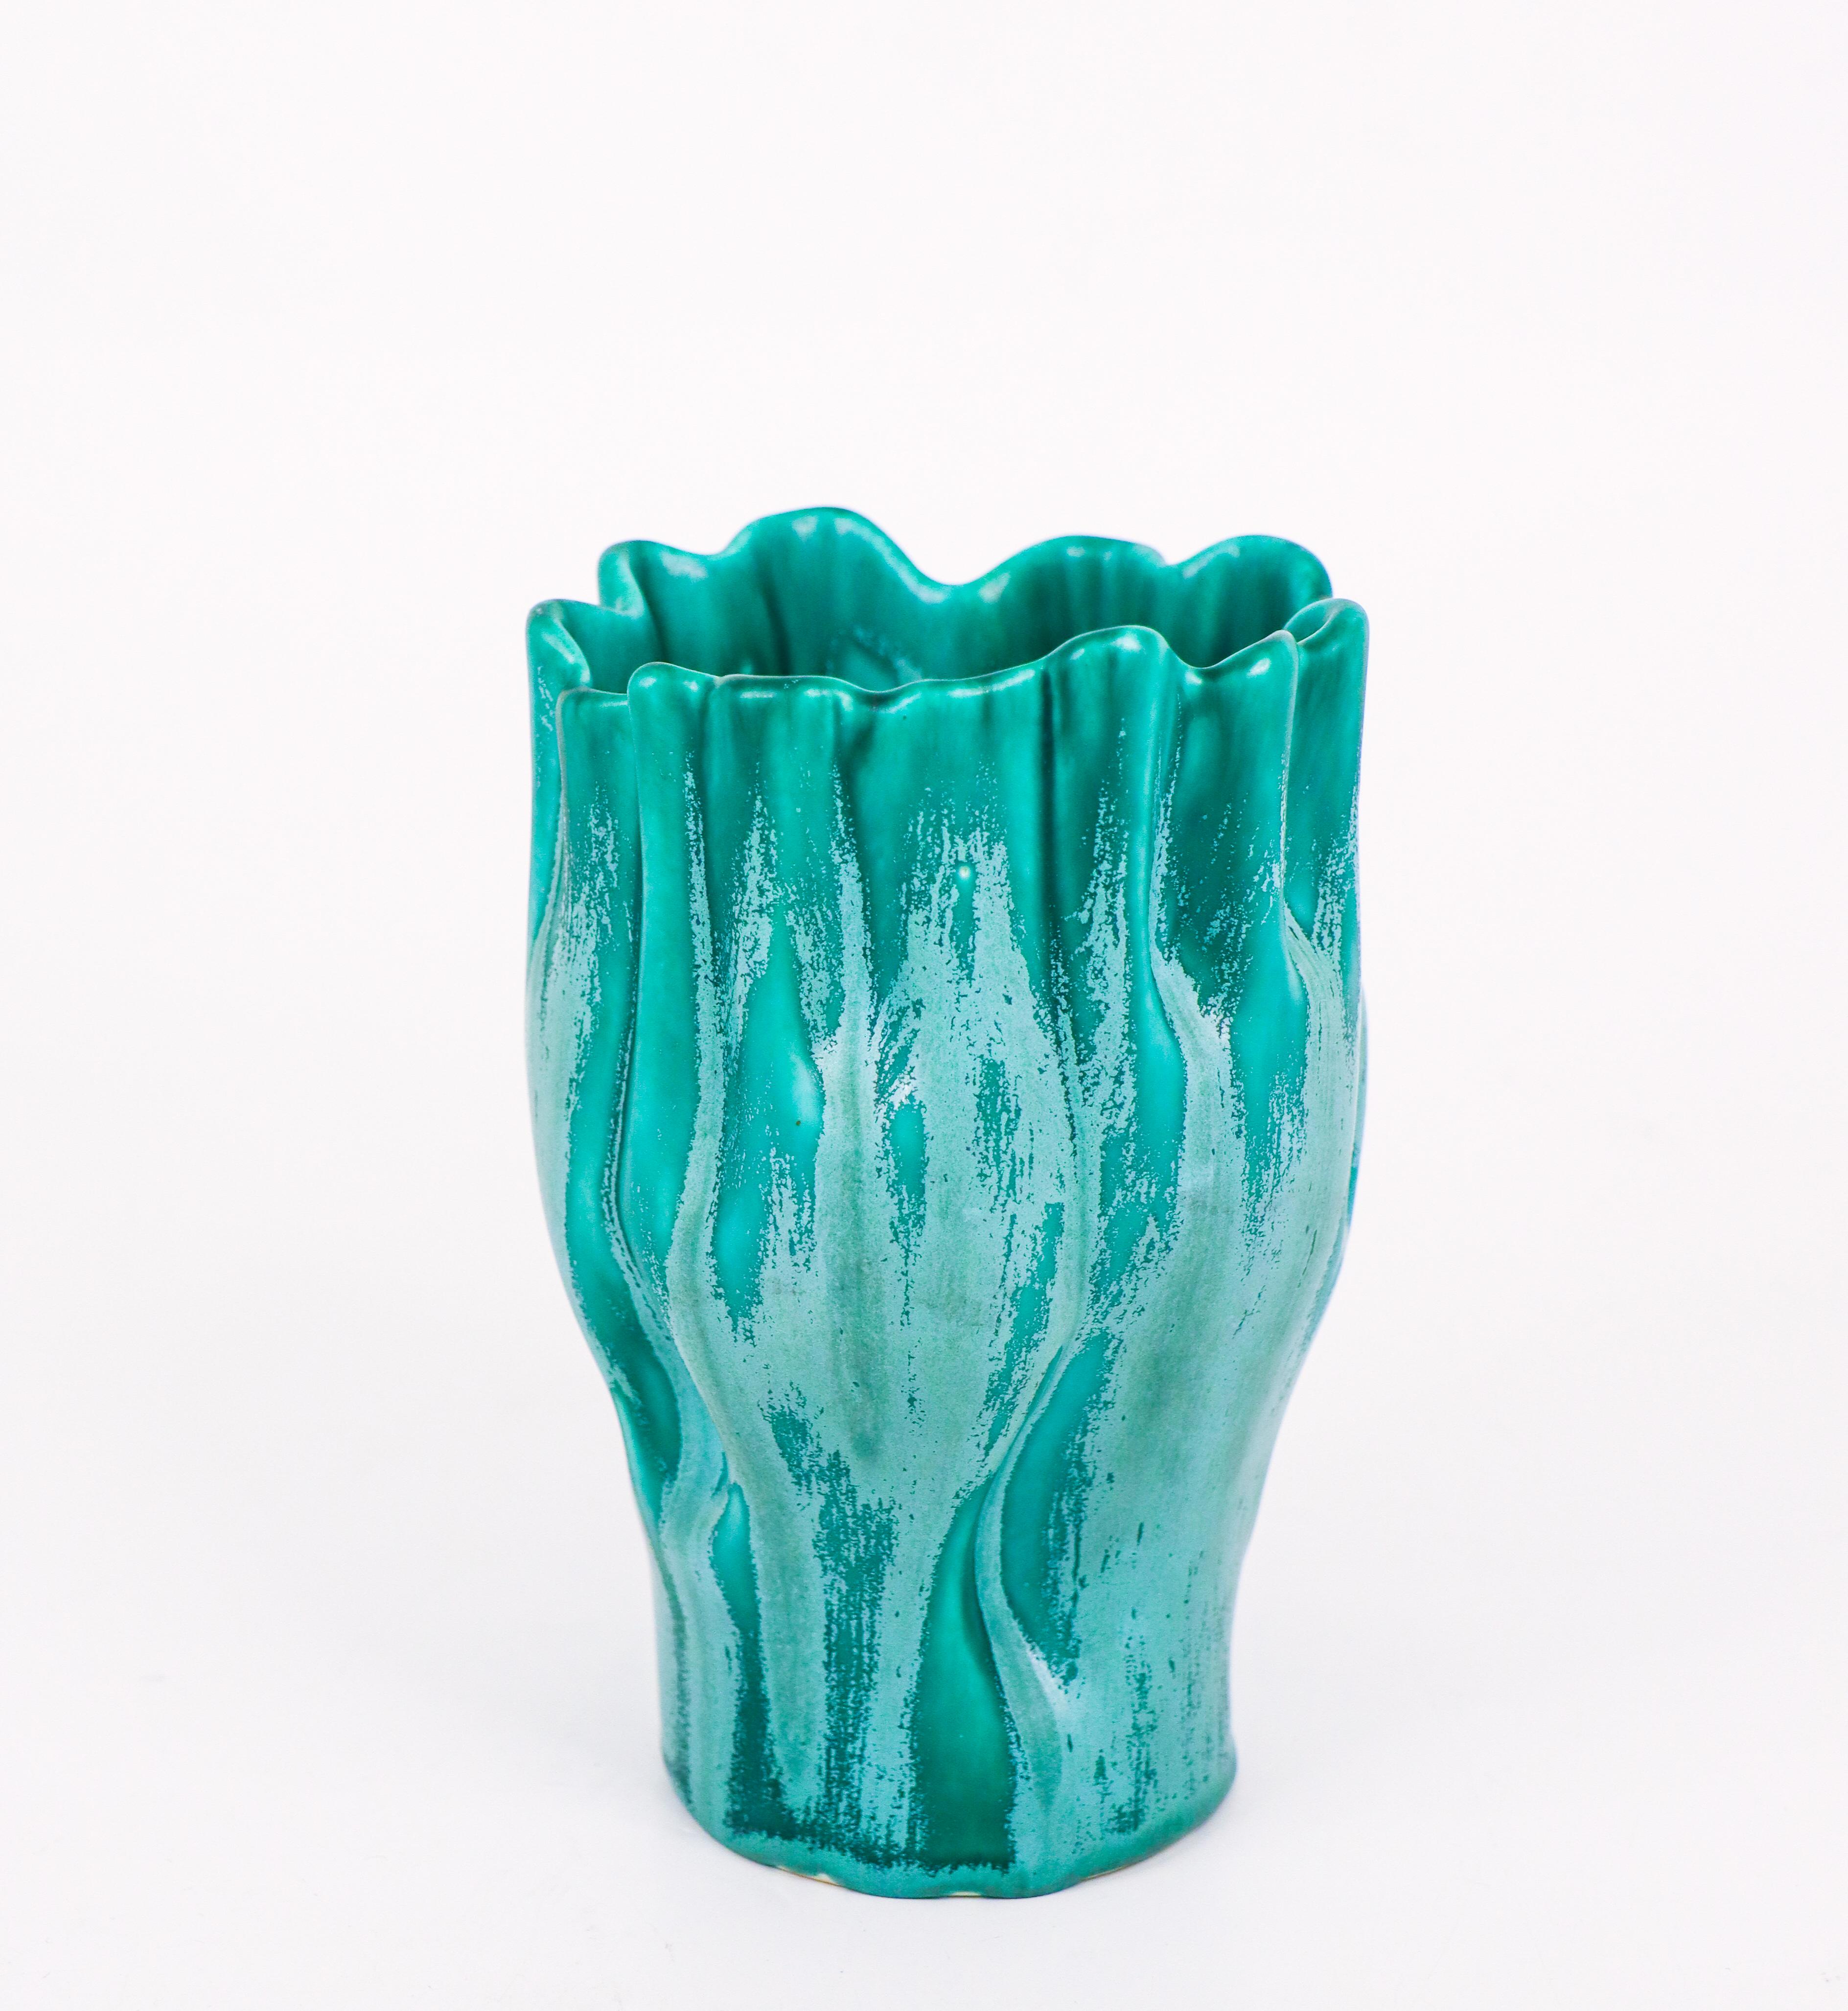 A lovely turquoise naturally shaped vase designed by Ewald Dahlskog at Bo Fajans, Sweden in the 1930s. The vase is 15 cm (6